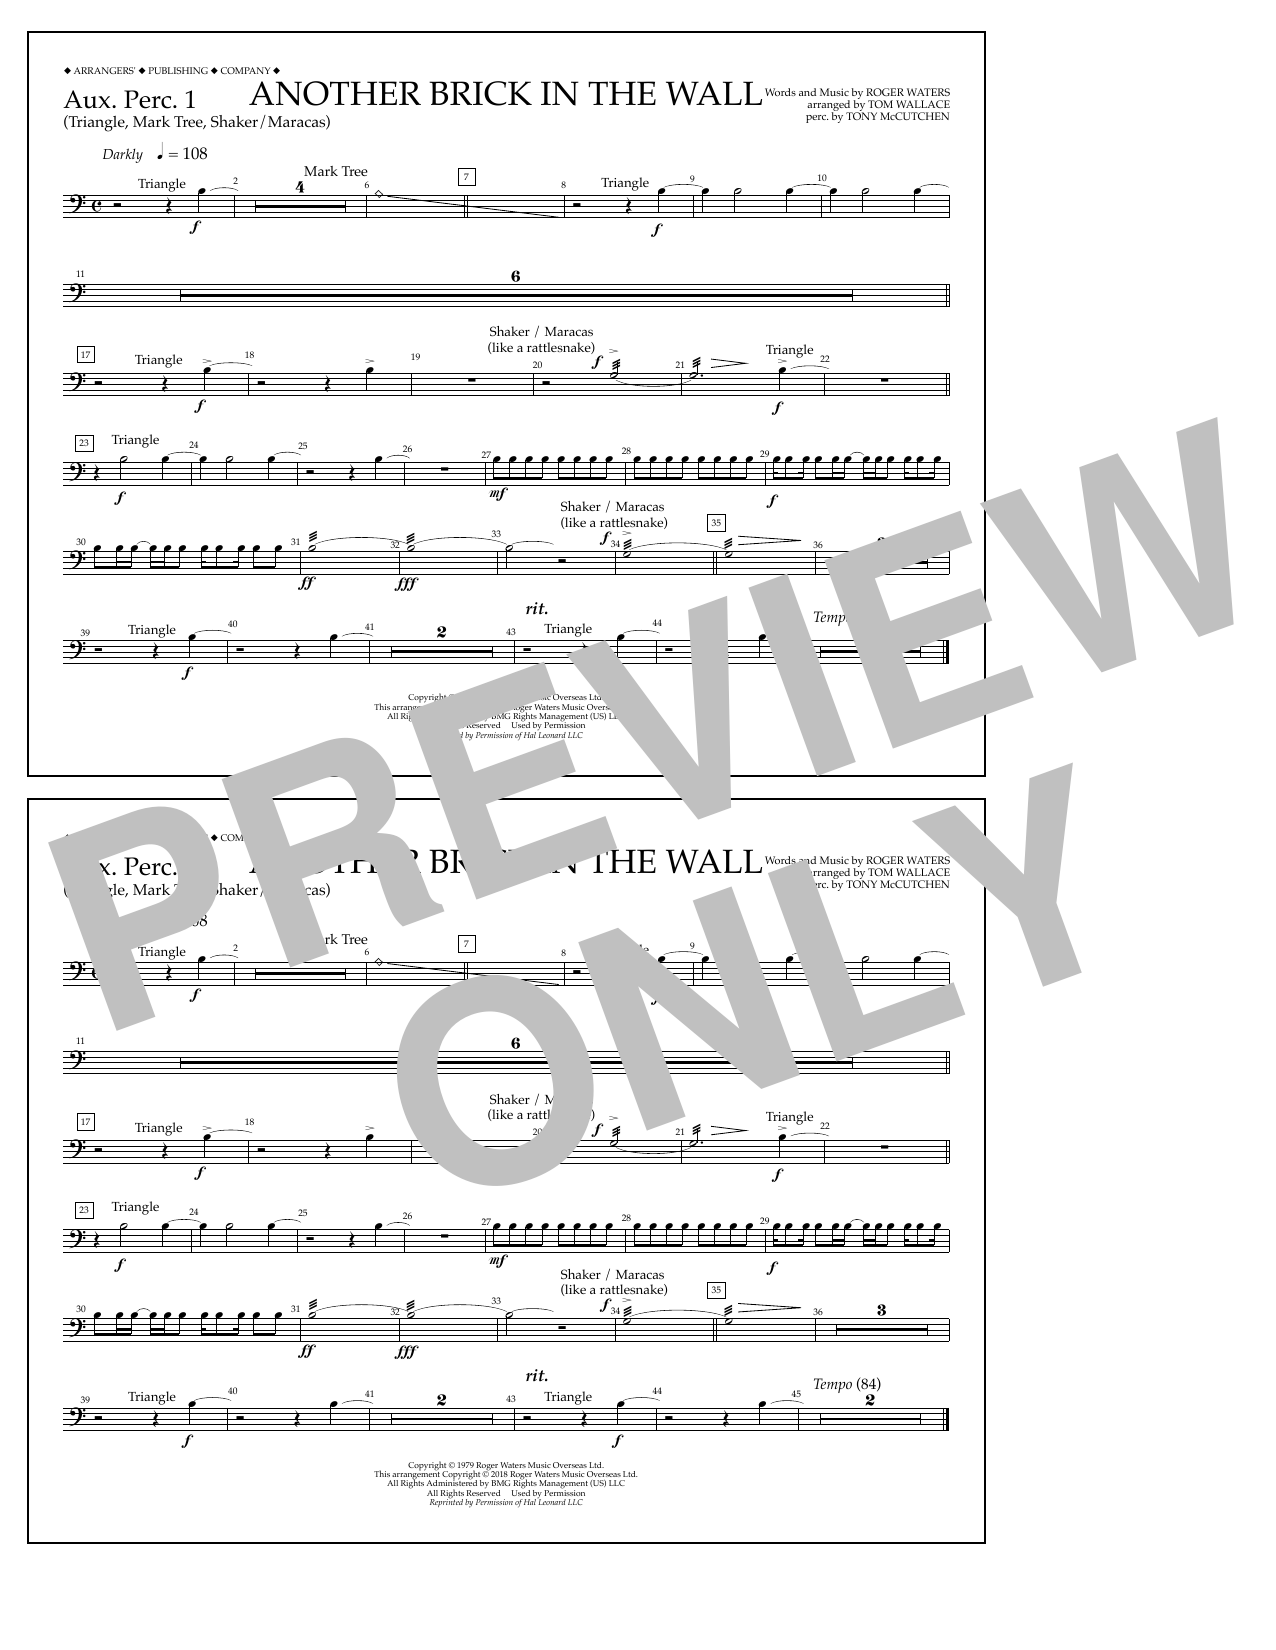 Download Tom Wallace Another Brick in the Wall - Aux. Perc. Sheet Music